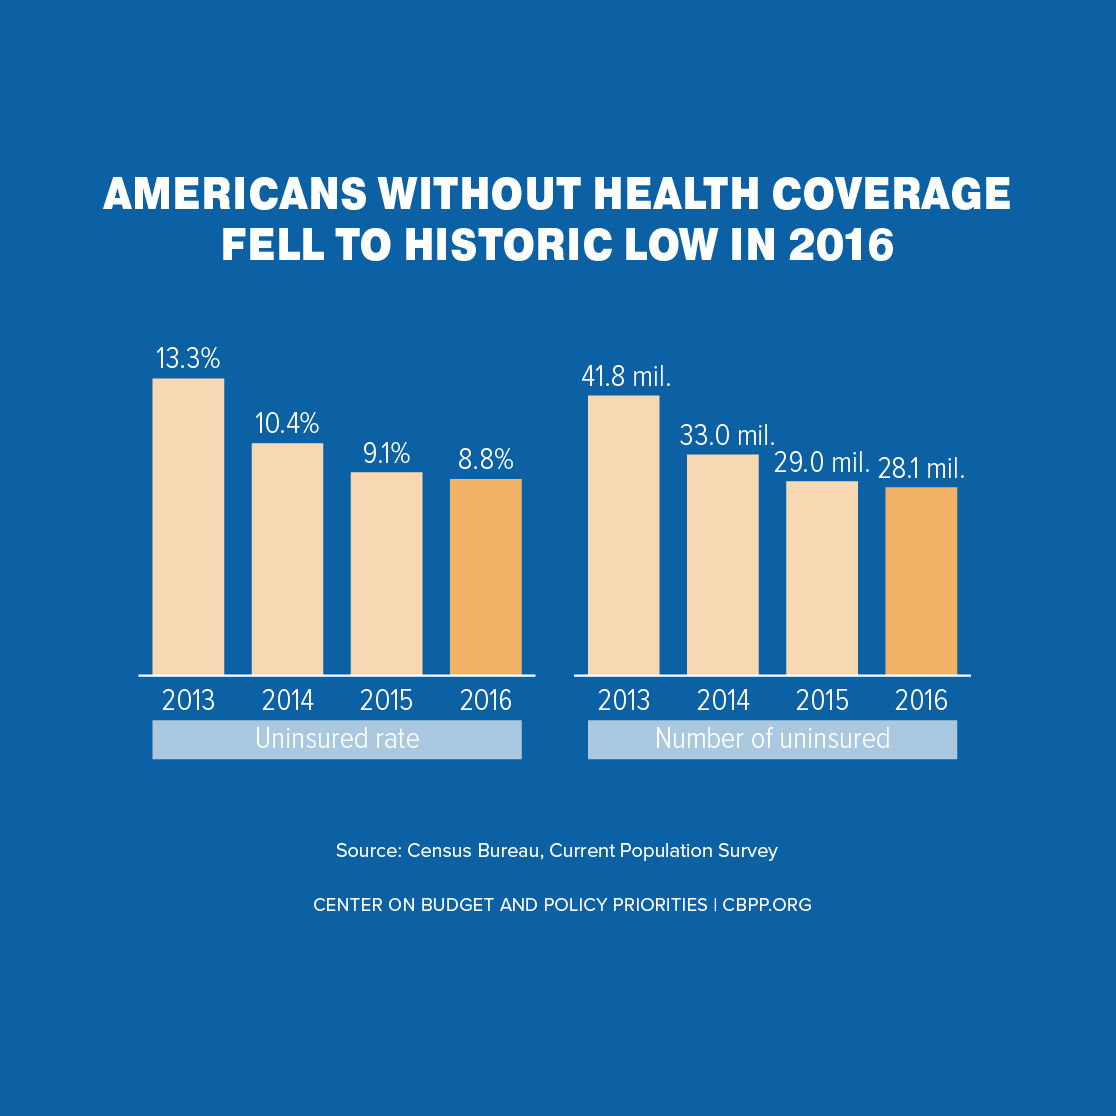 Americans Without Health Coverage Fell to Historic Low in 2016